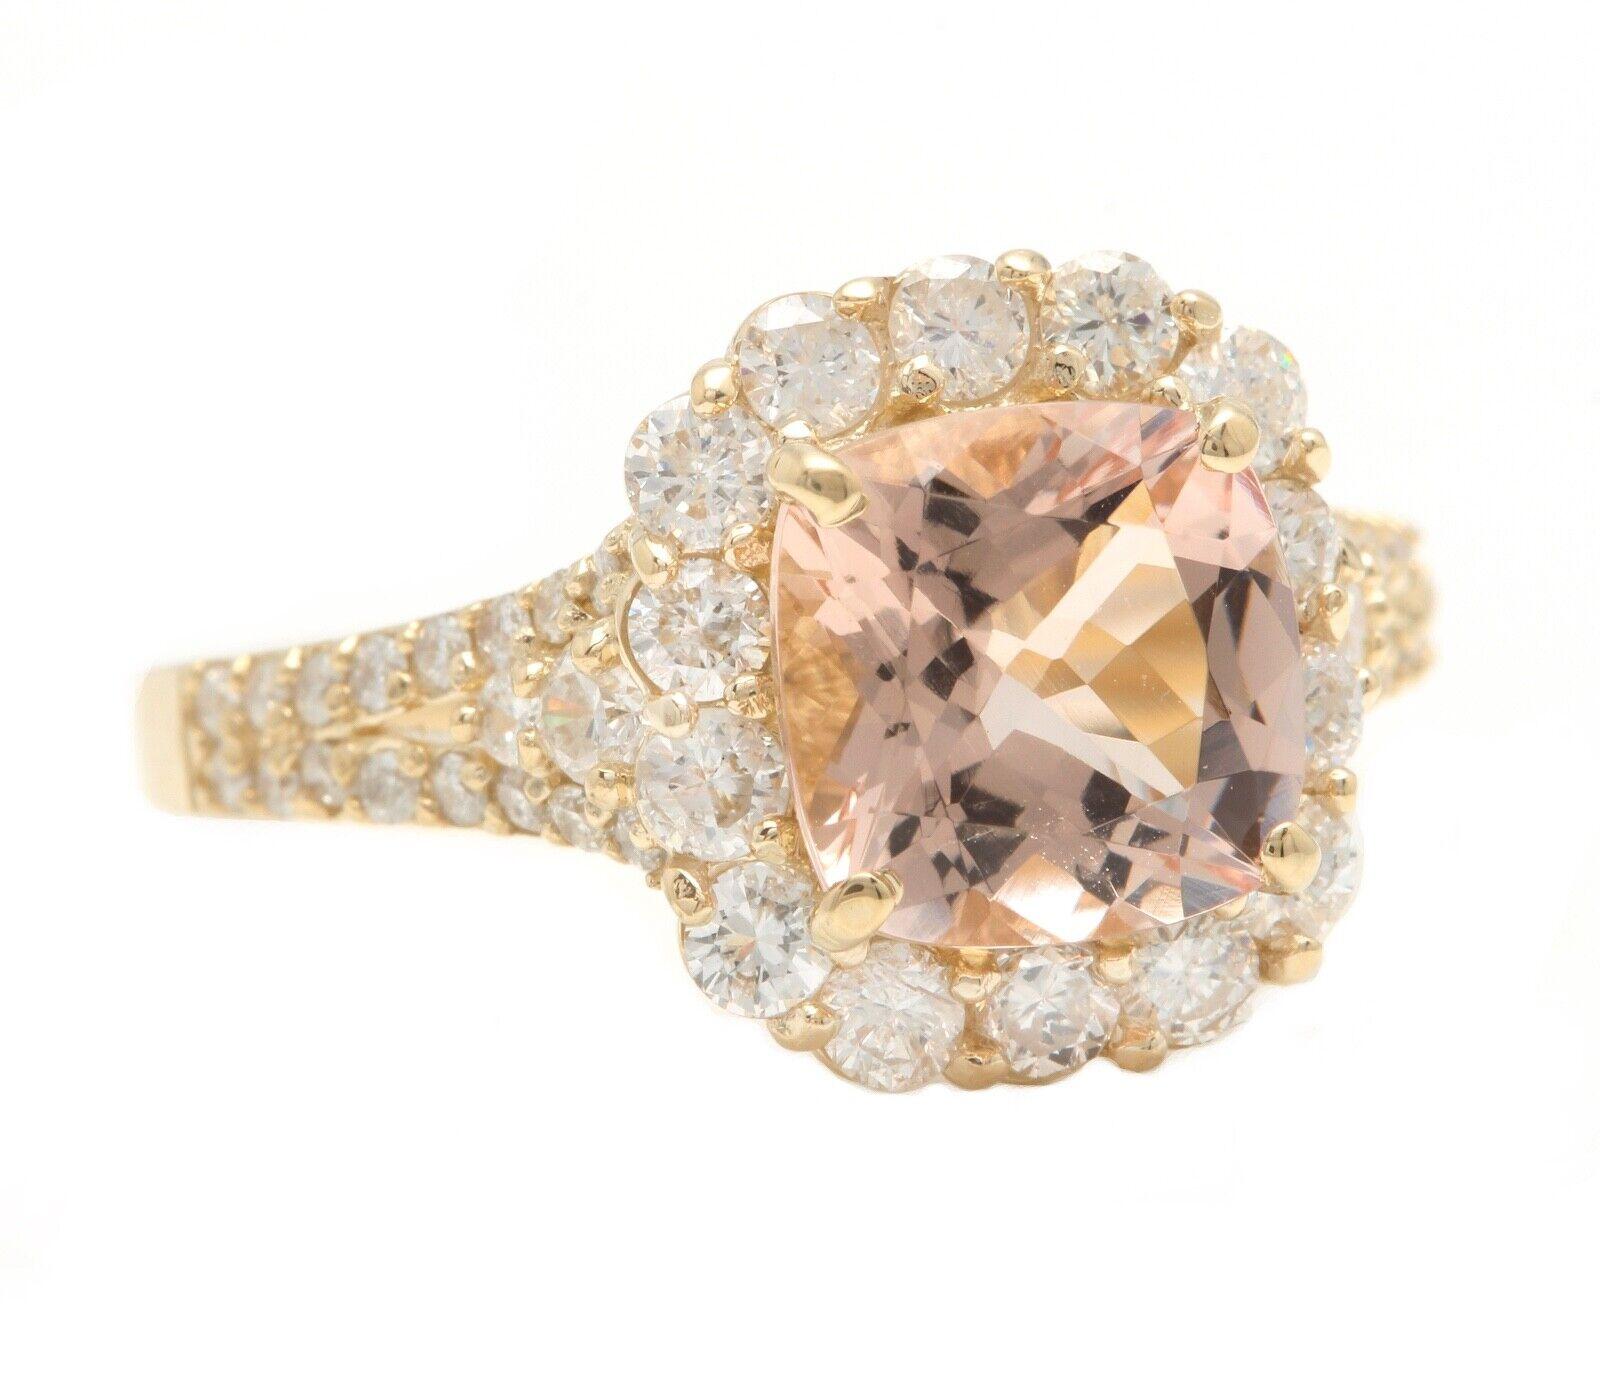 3.00 Carats Impressive Natural Morganite and Diamond 14K Solid Yellow Gold Ring

Suggested Replacement Value: Approx. $4,500.00

Total Morganite Weight is: Approx. 2.00 Carats

Morganite Treatment: Heating

Morganite Measures: Approx. 8.00 x 8.00